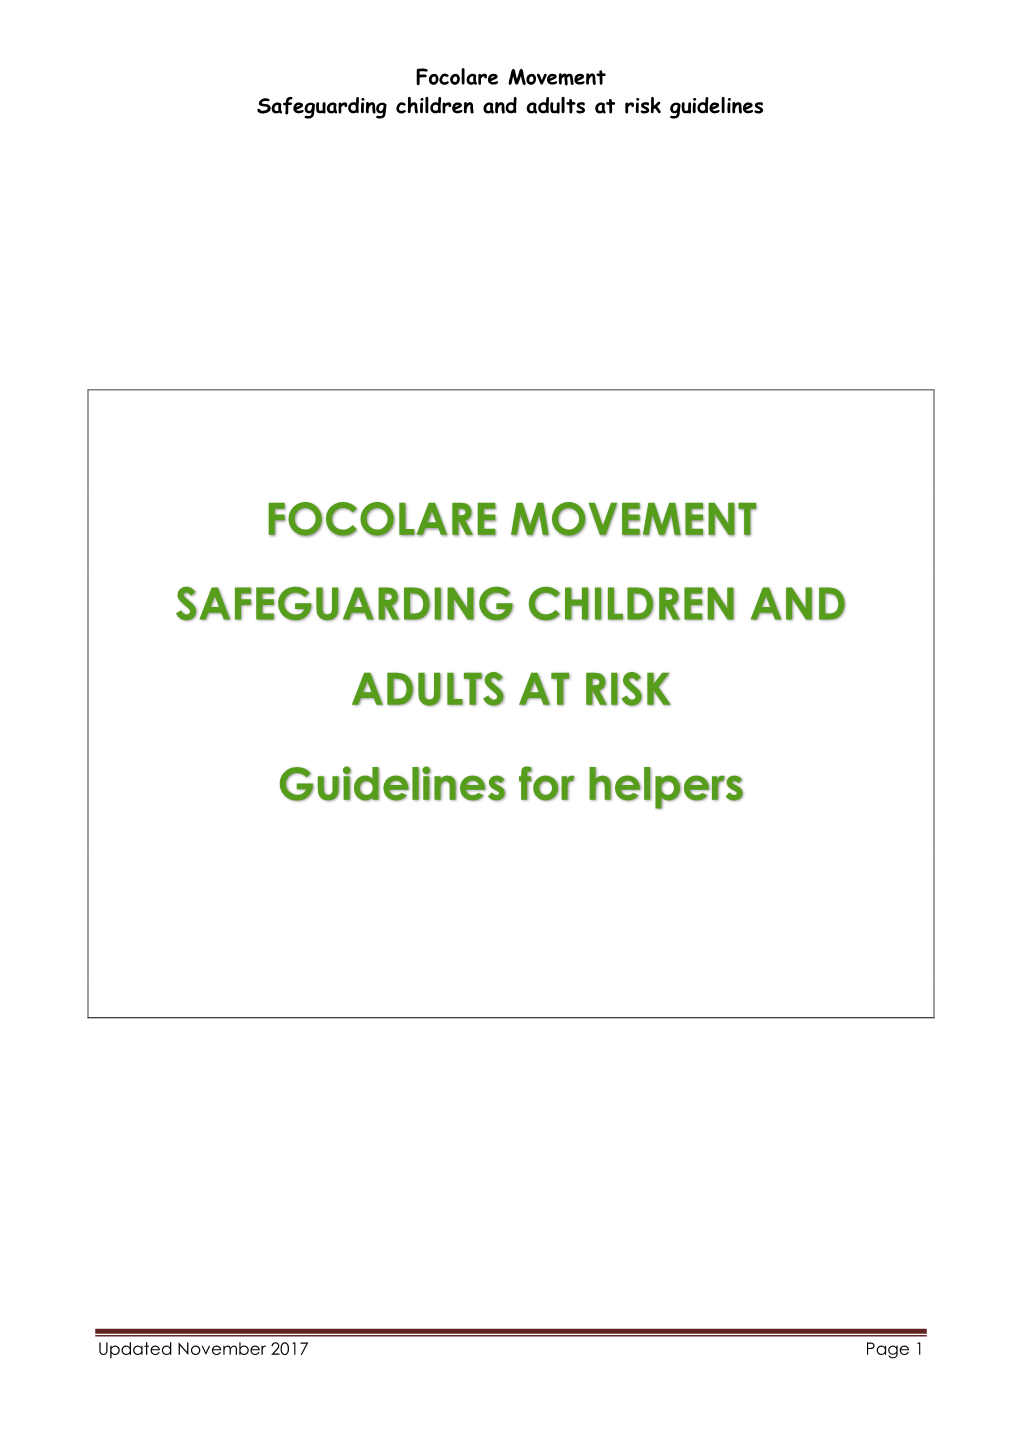 Focolare Movement Safeguarding Children and Adults at Risk Guidelines